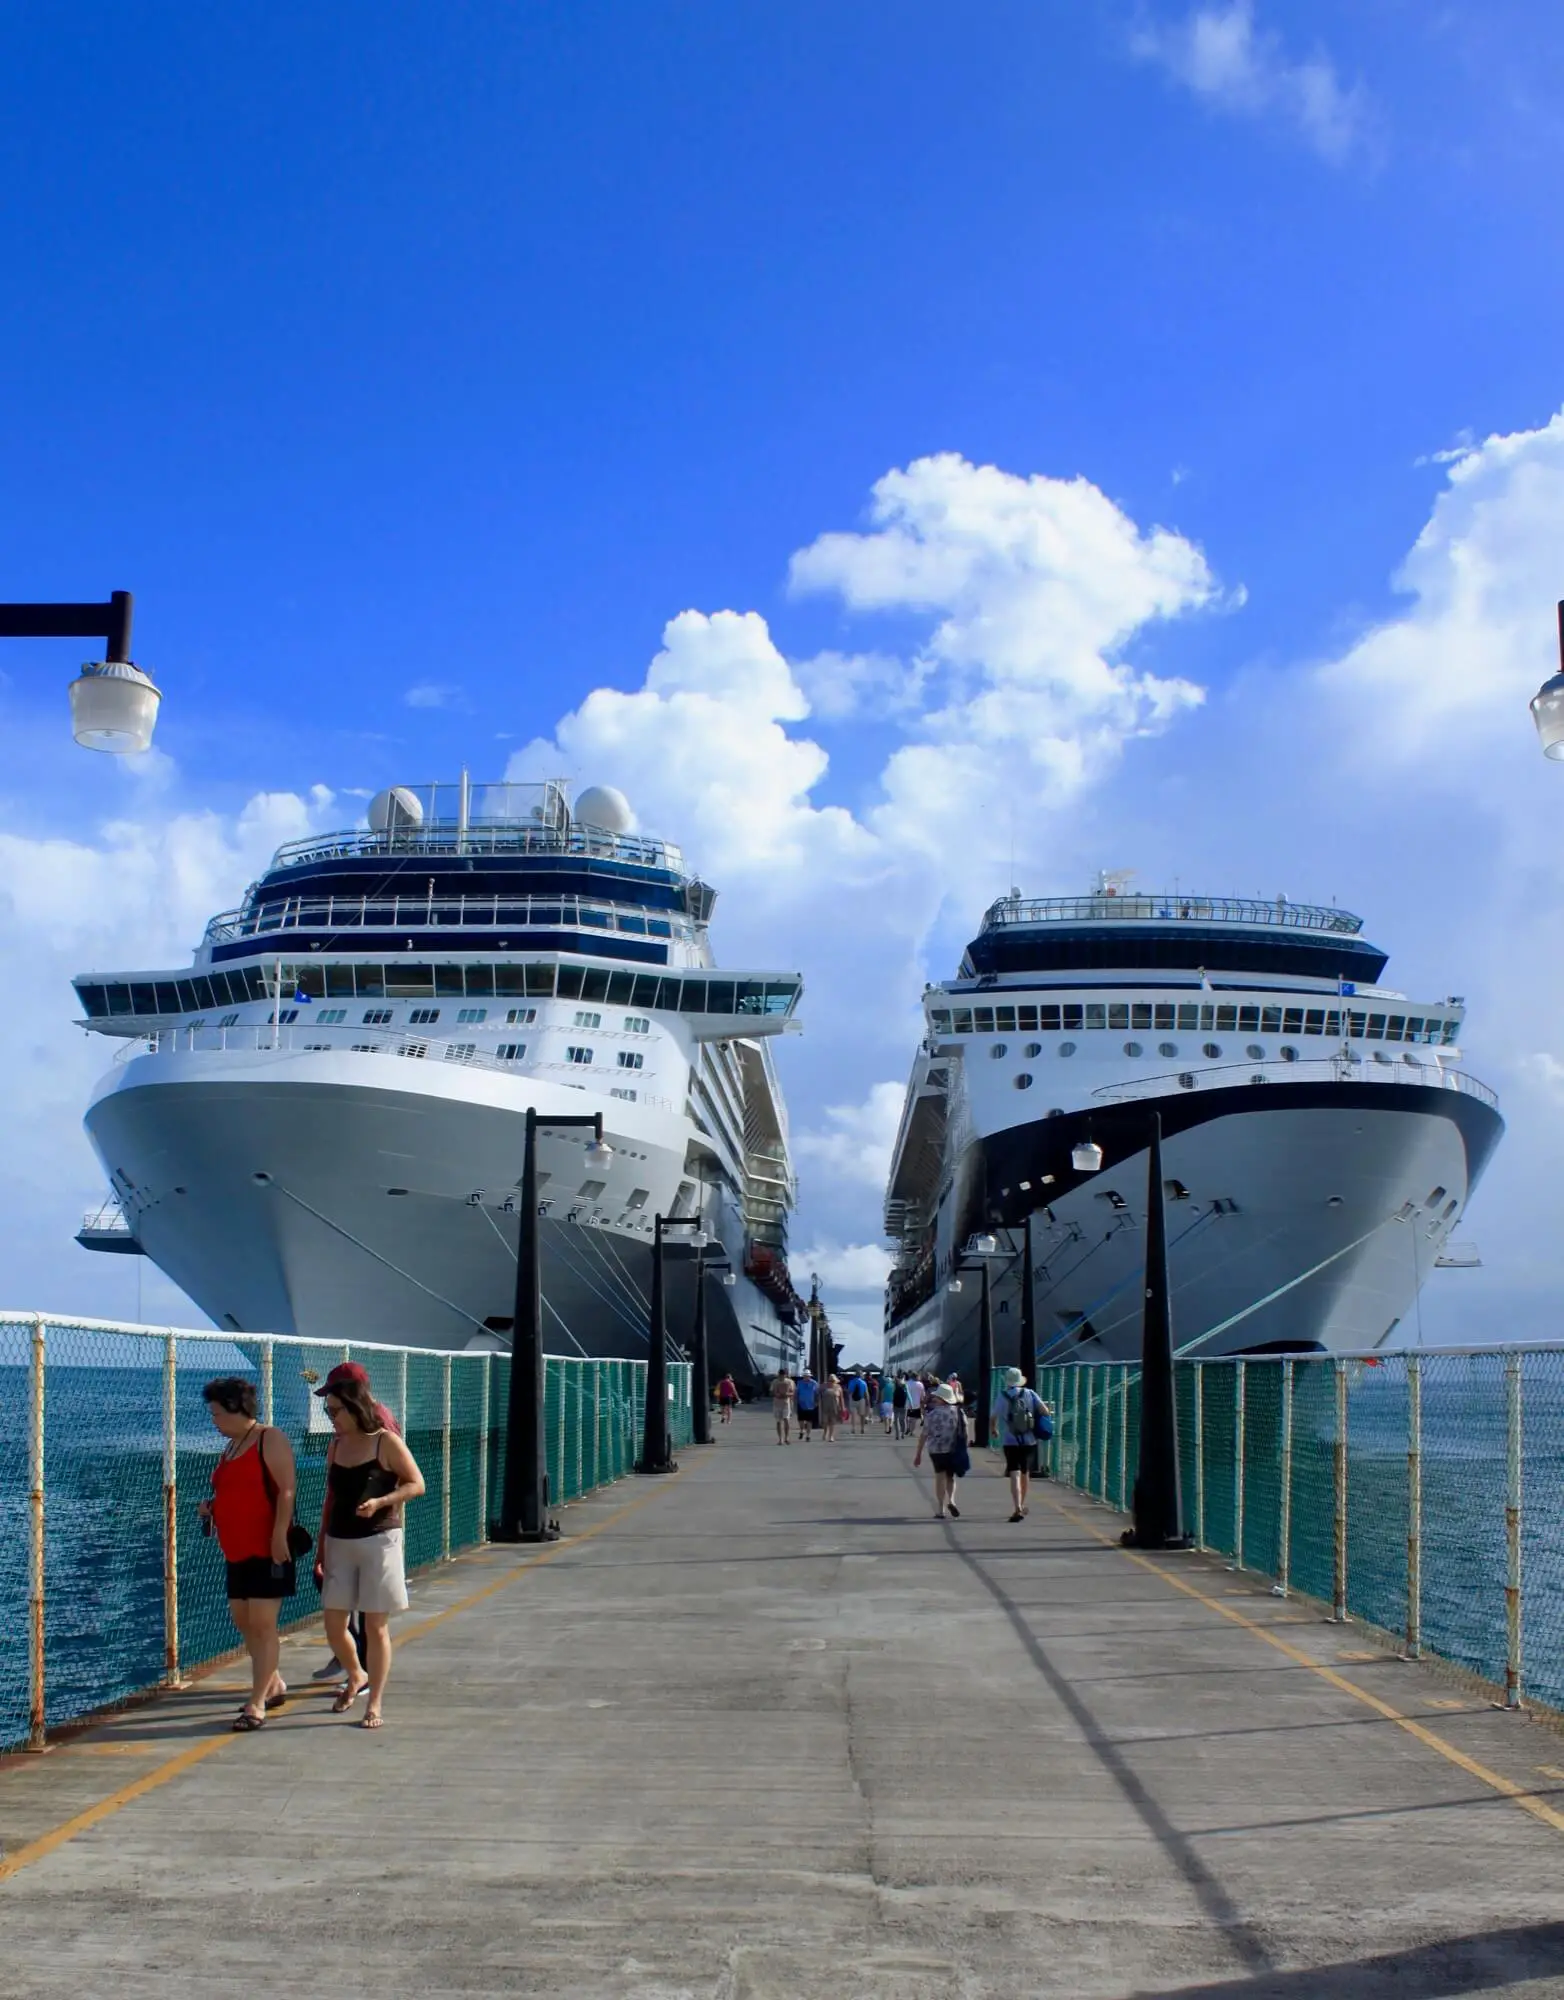 Two cruise ships docked at a cement dock